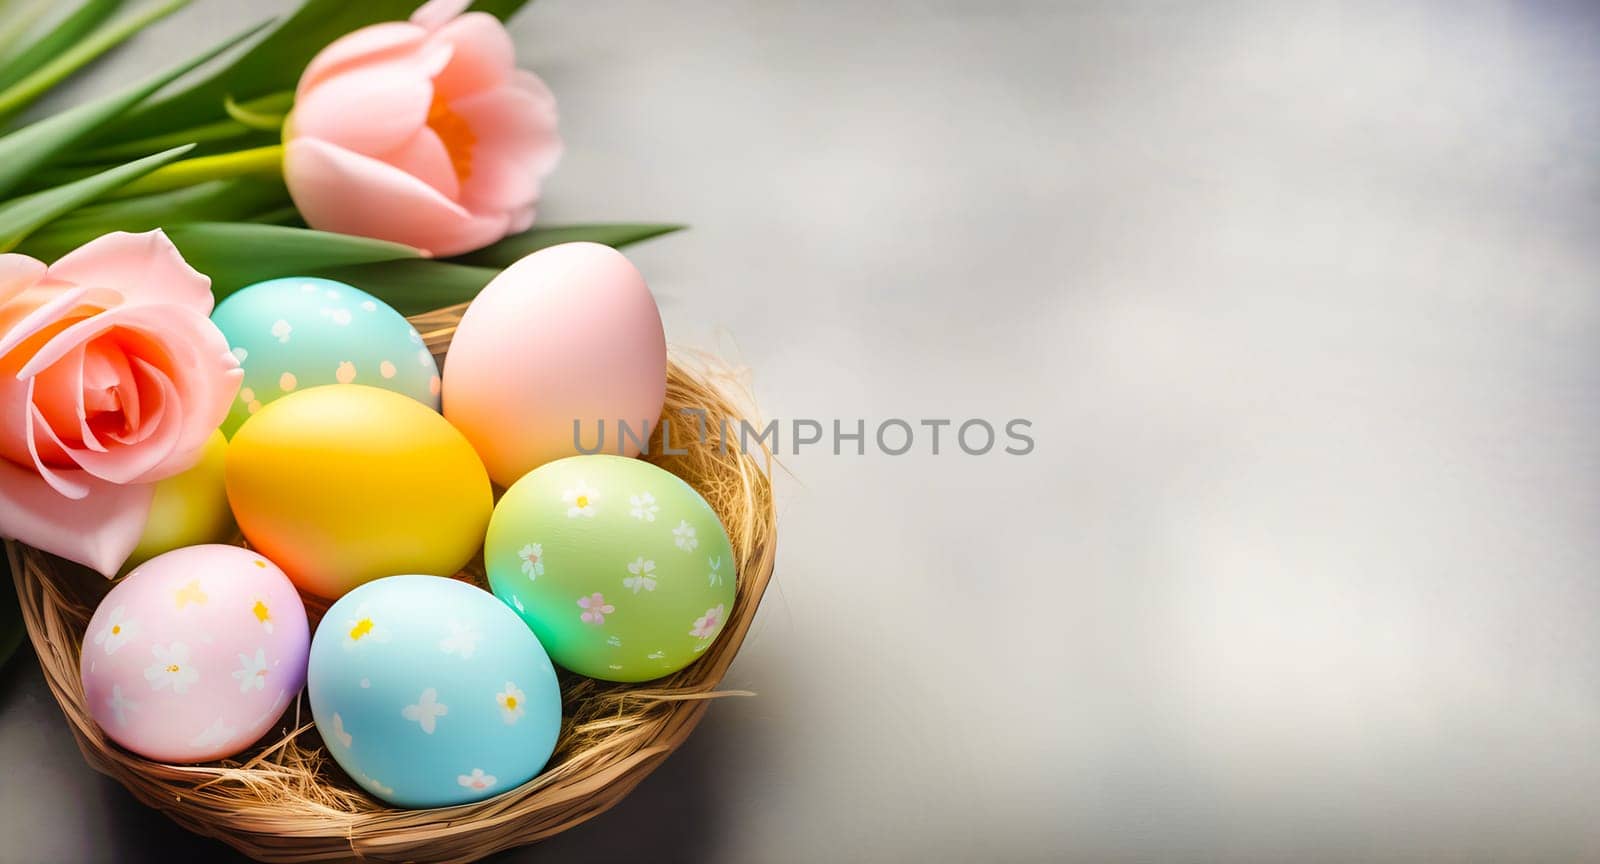 Multicolored painted eggs with delicate spring flowers in the nest against a light gray stone background. The concept of the Spring and Easter holiday with a copy space.